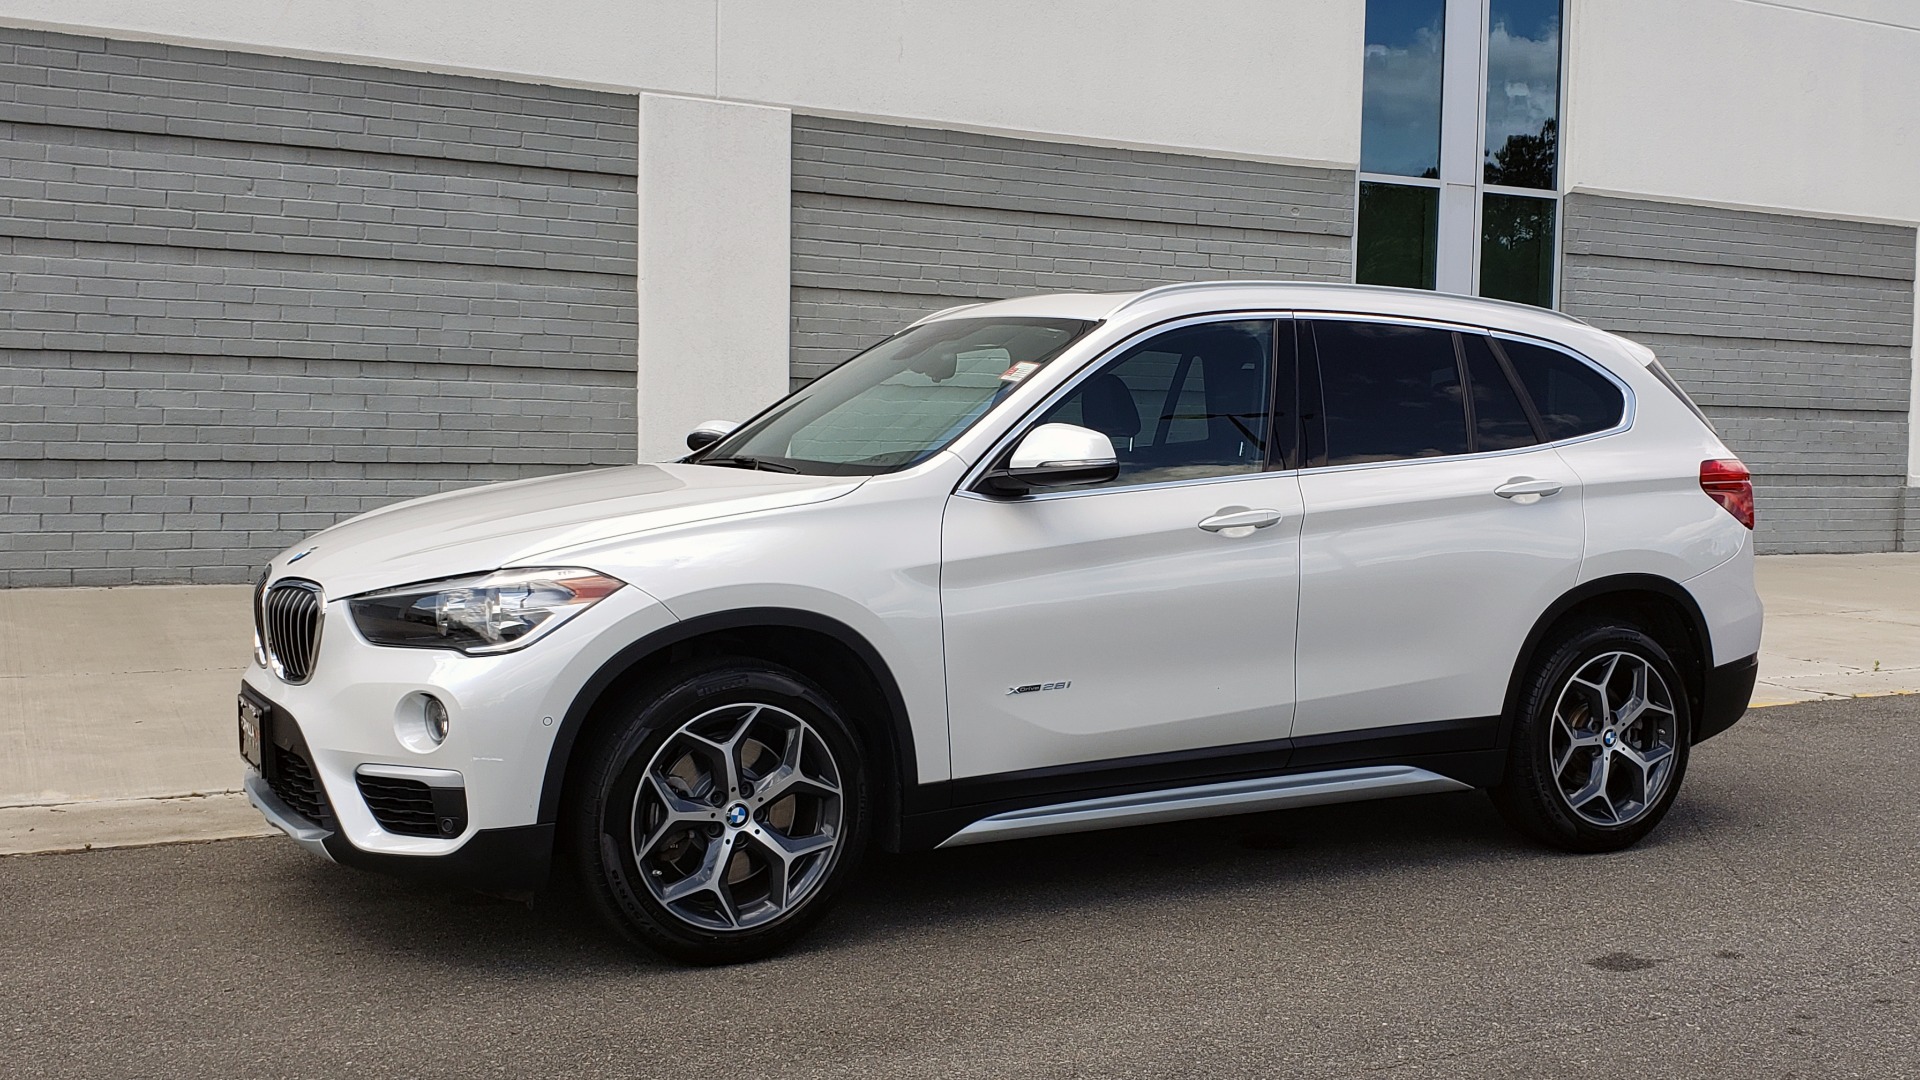 Used 2018 BMW X1 XDRIVE28I / NAV / CONV PKG / HTD SEATS / APPLE / PANO-ROOF / REARVIEW for sale Sold at Formula Imports in Charlotte NC 28227 4